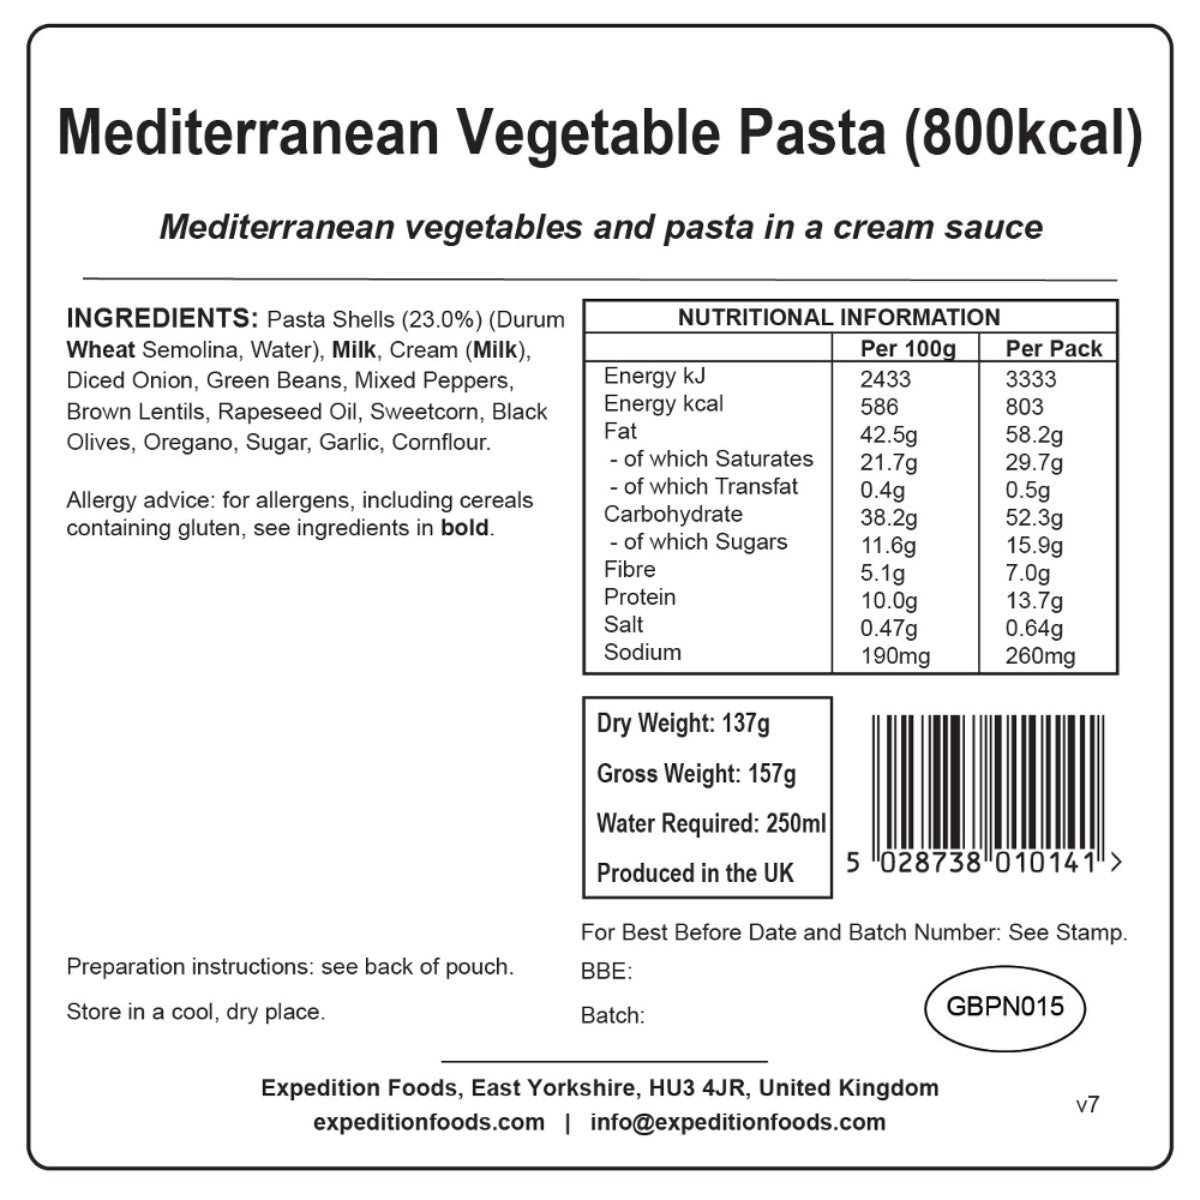 Expedition Foods Mediterranean Vegetable Pasta (800kcal), in pack